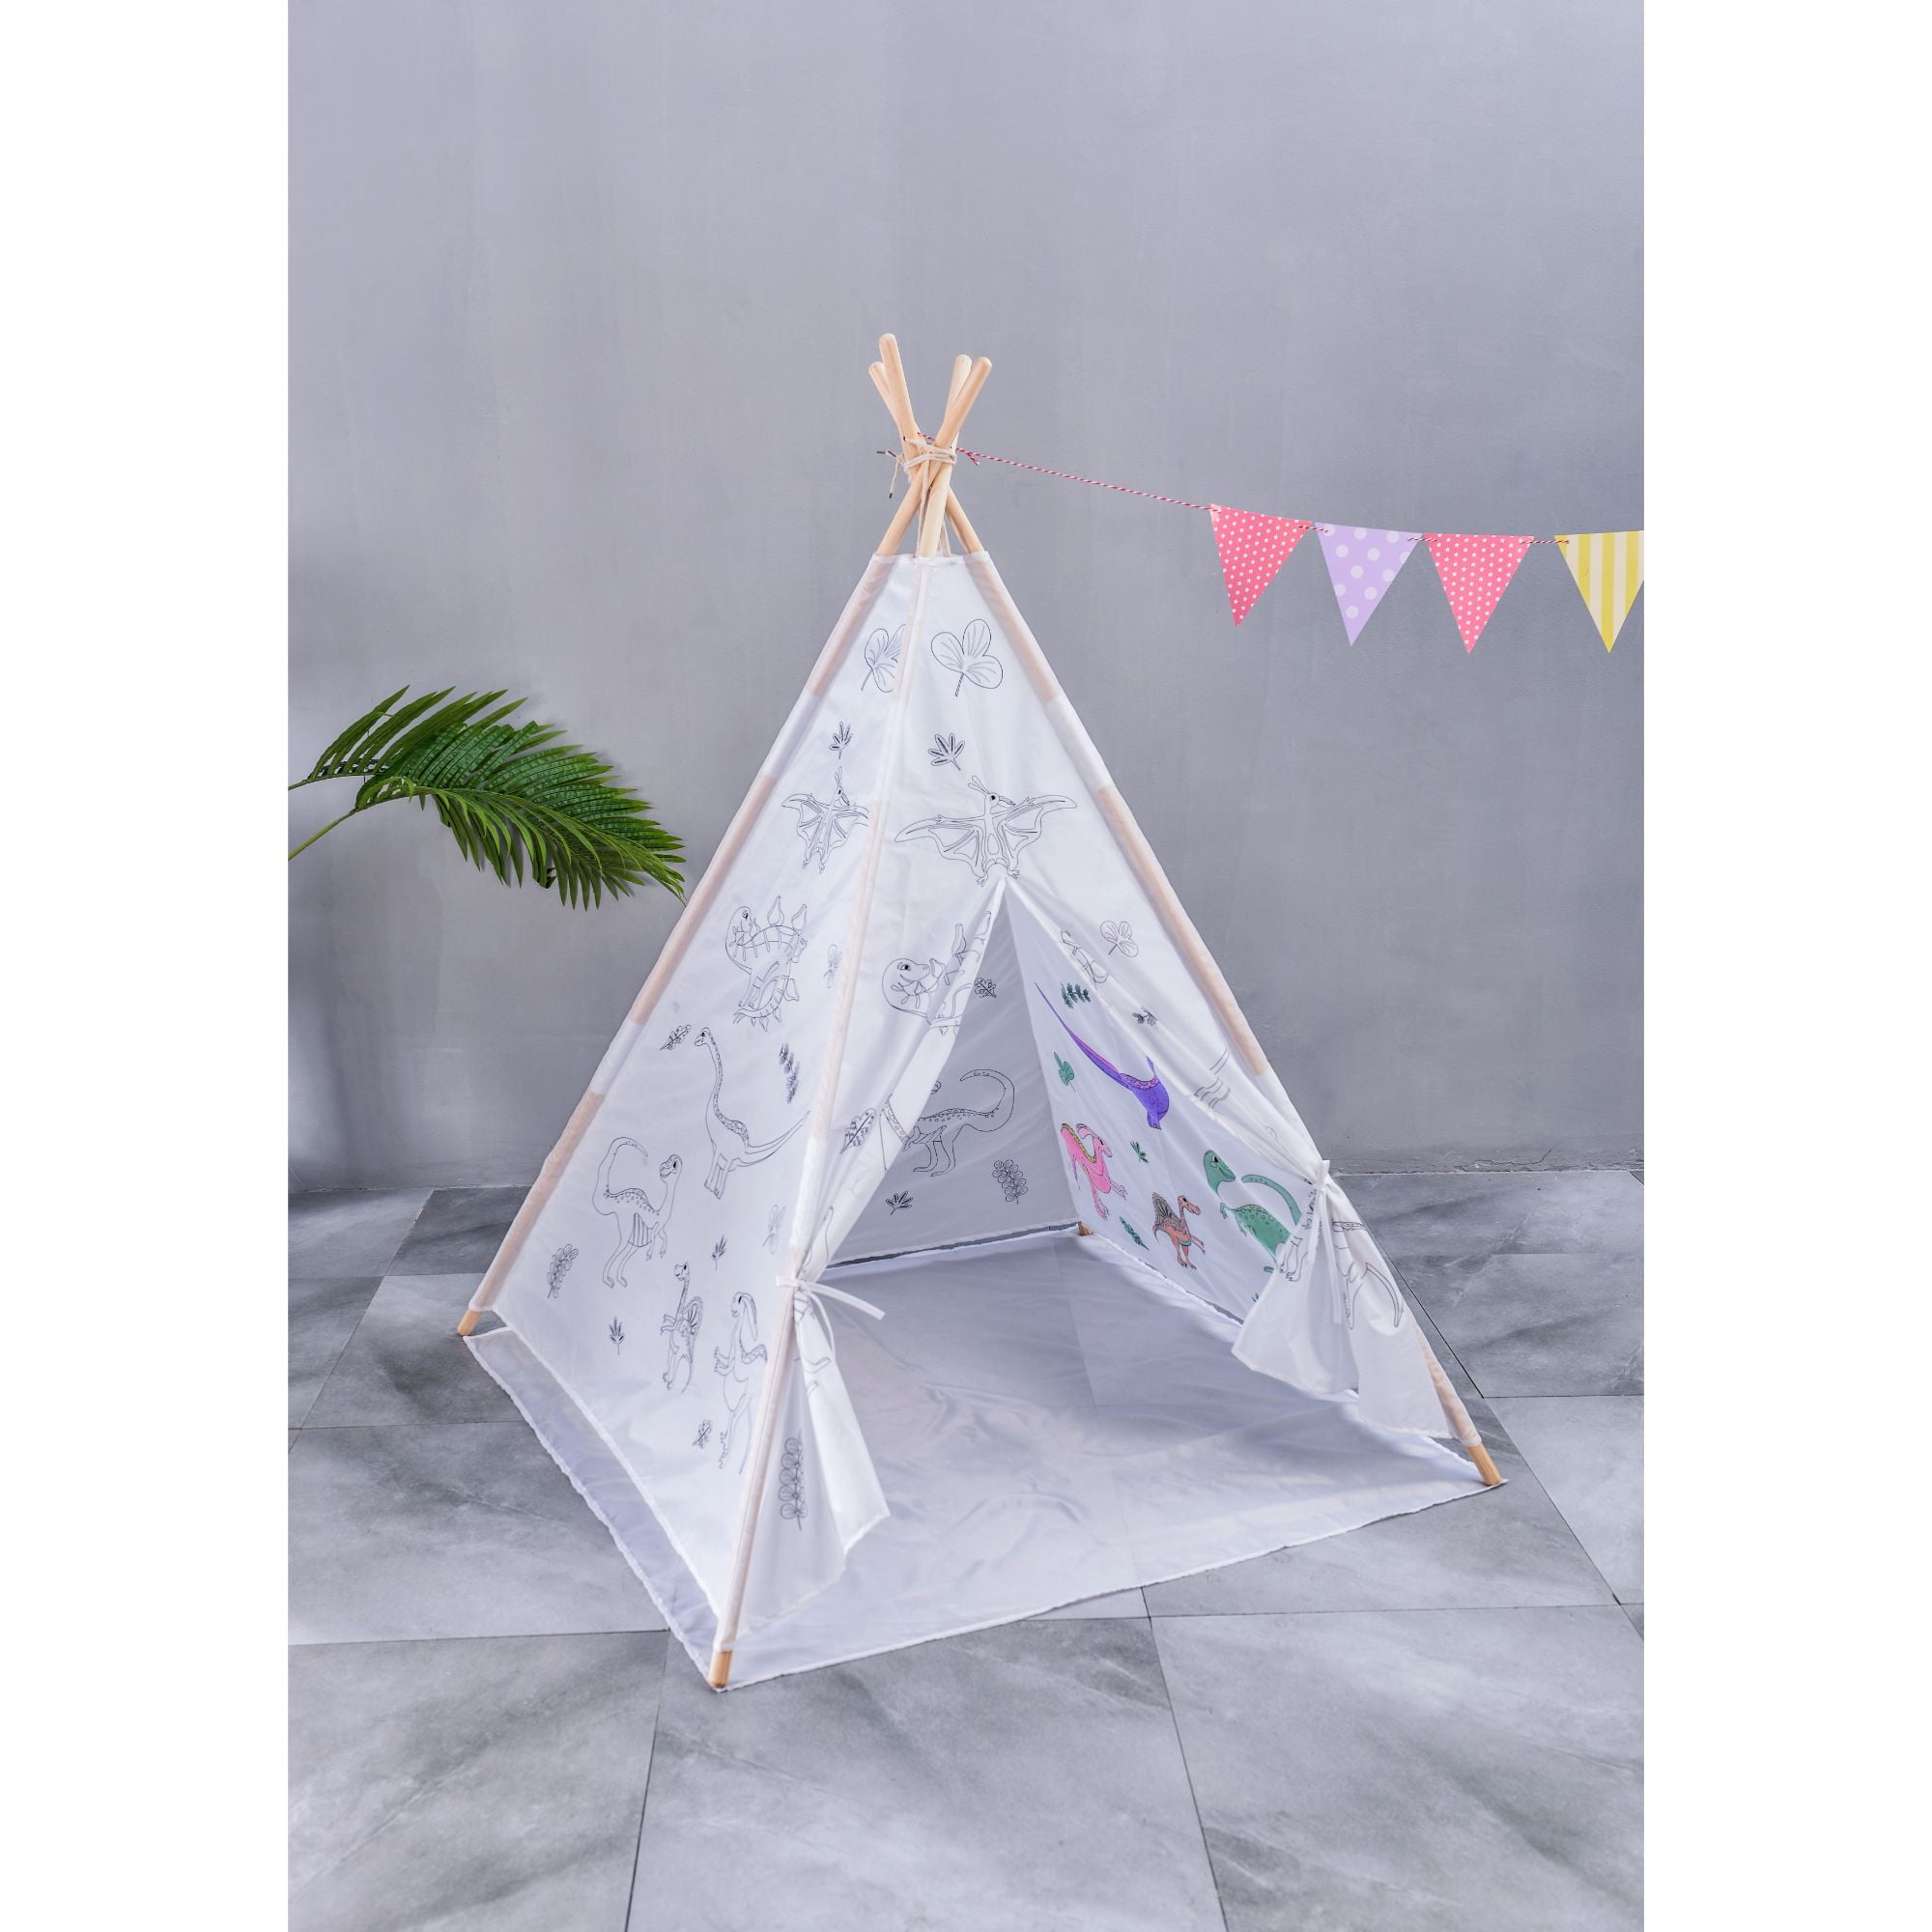 Details about   Natural Cotton Play Tent Kids Teepee Tents Playhouse Toddlers LED Lights 